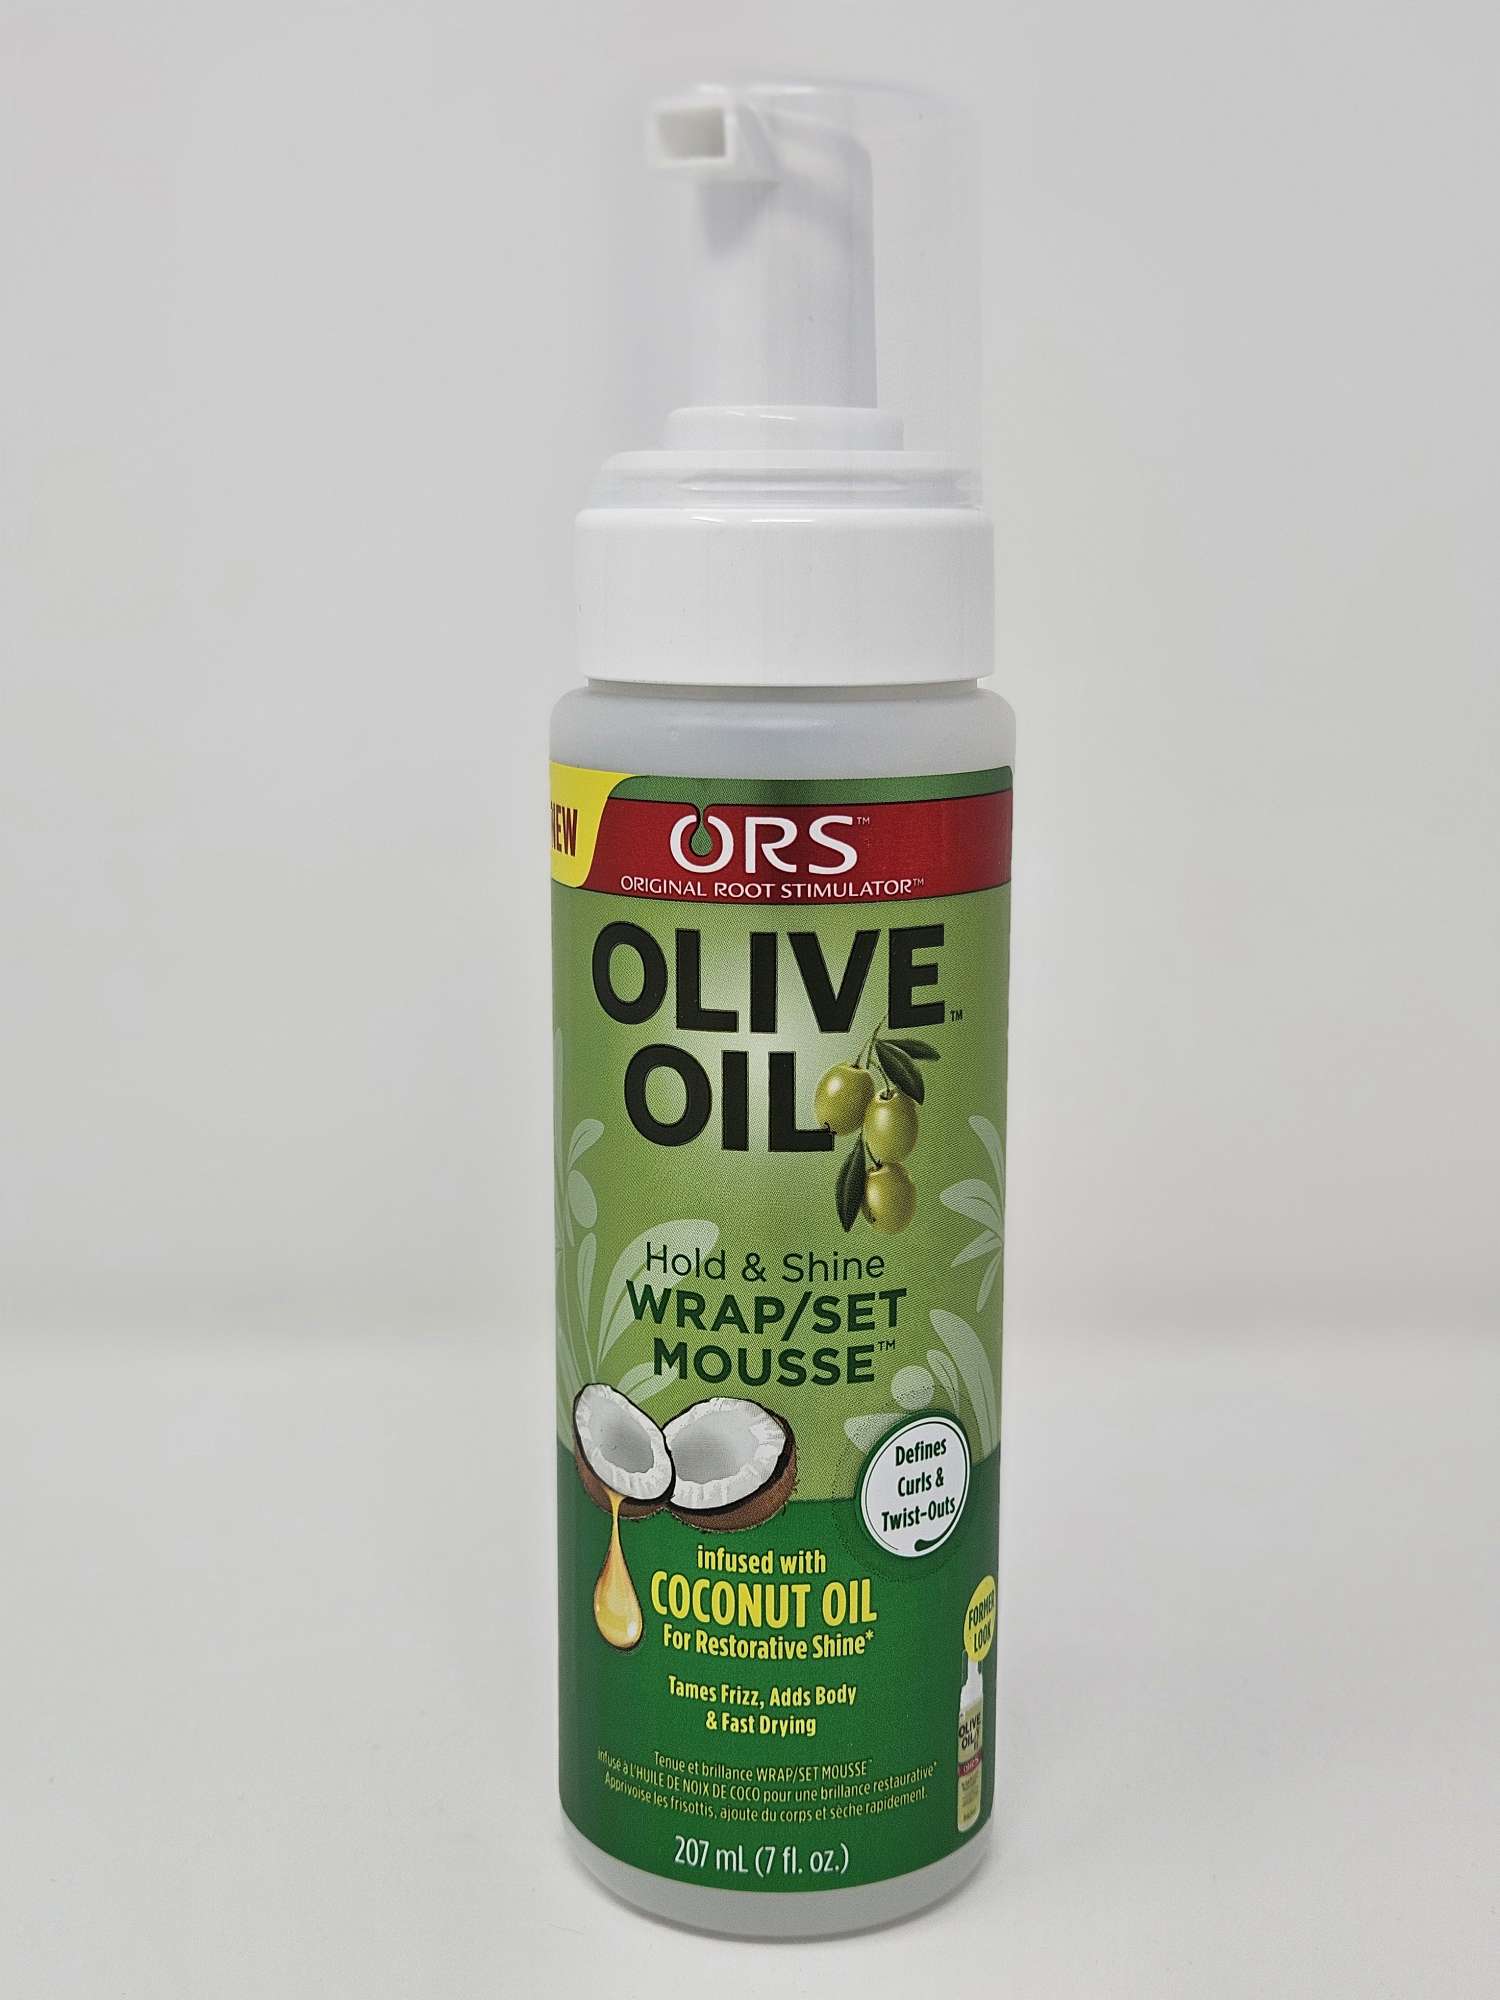 ORS Olive Oil Hold & Shine Wrap/Set Mousse with Coconut Oil - 7oz